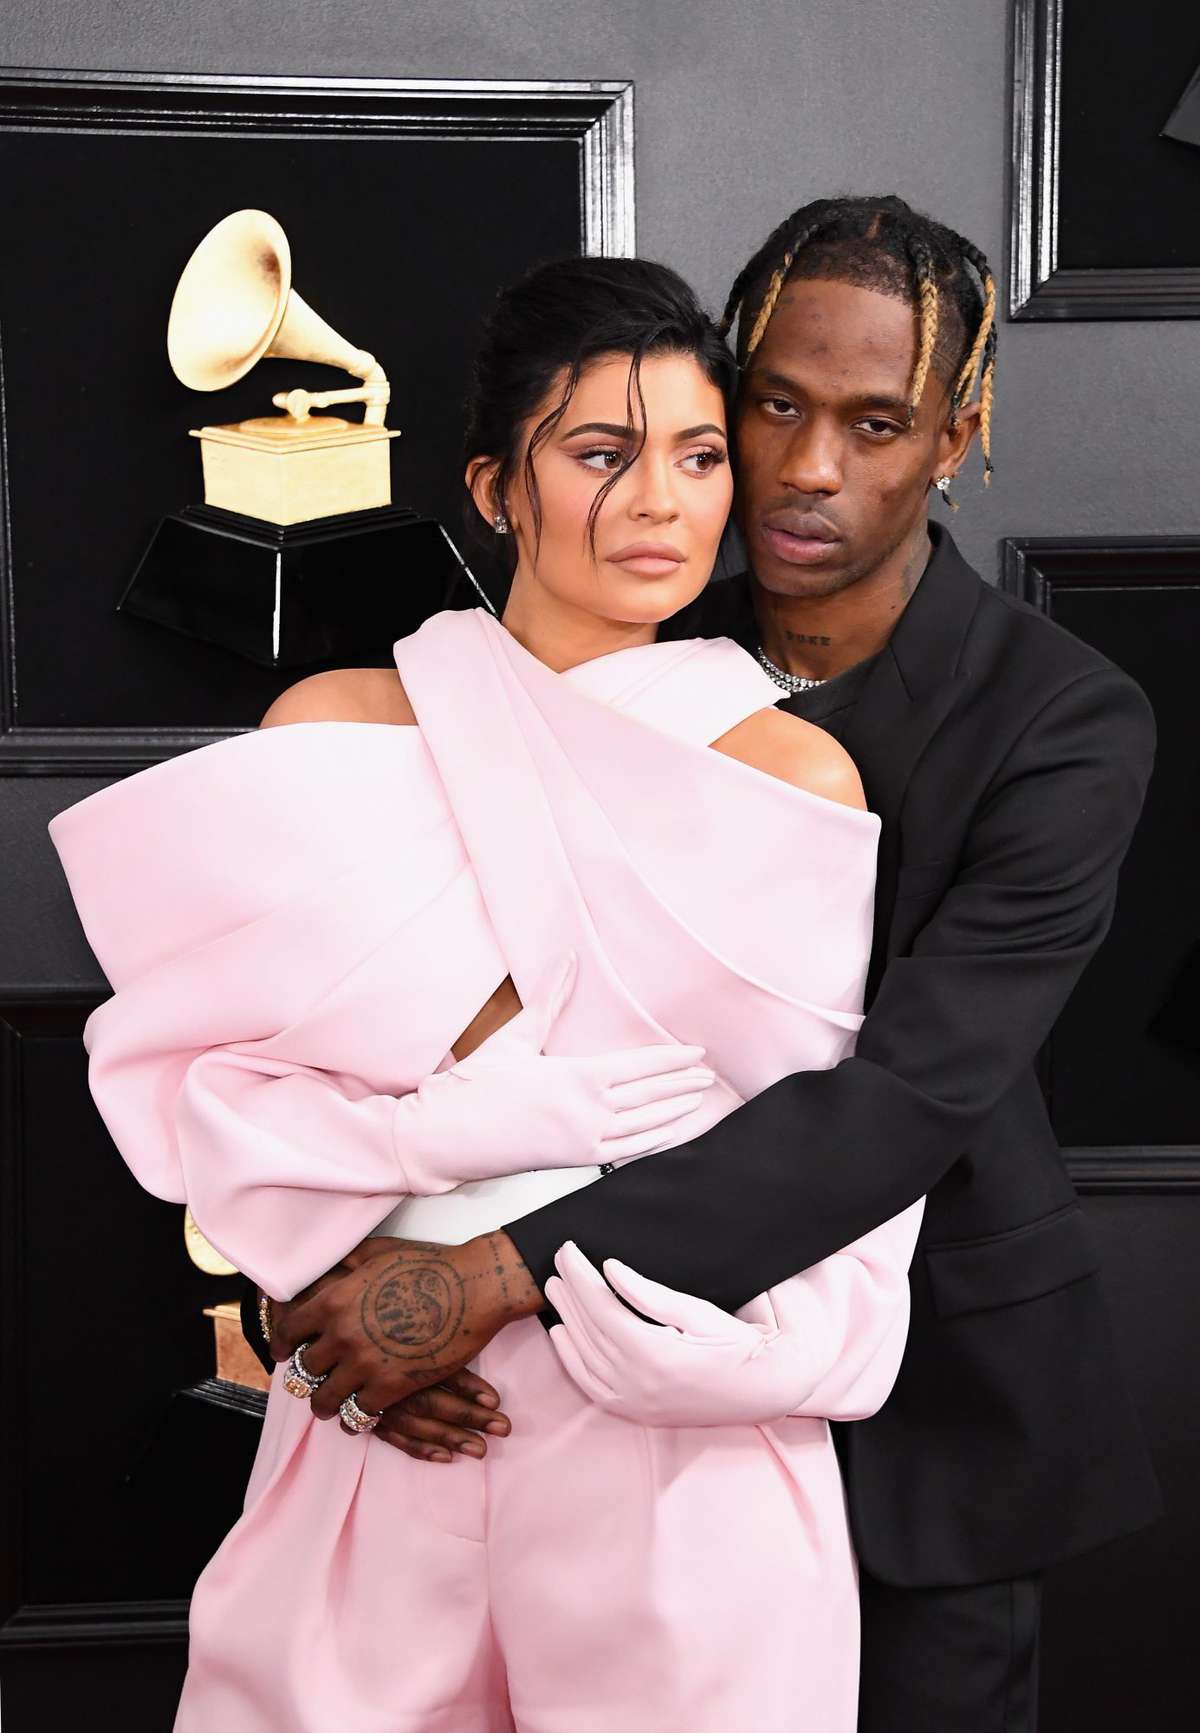 Is Kylie Jenner Trolling Her Fans By Carrying a Wedding Dress Around?